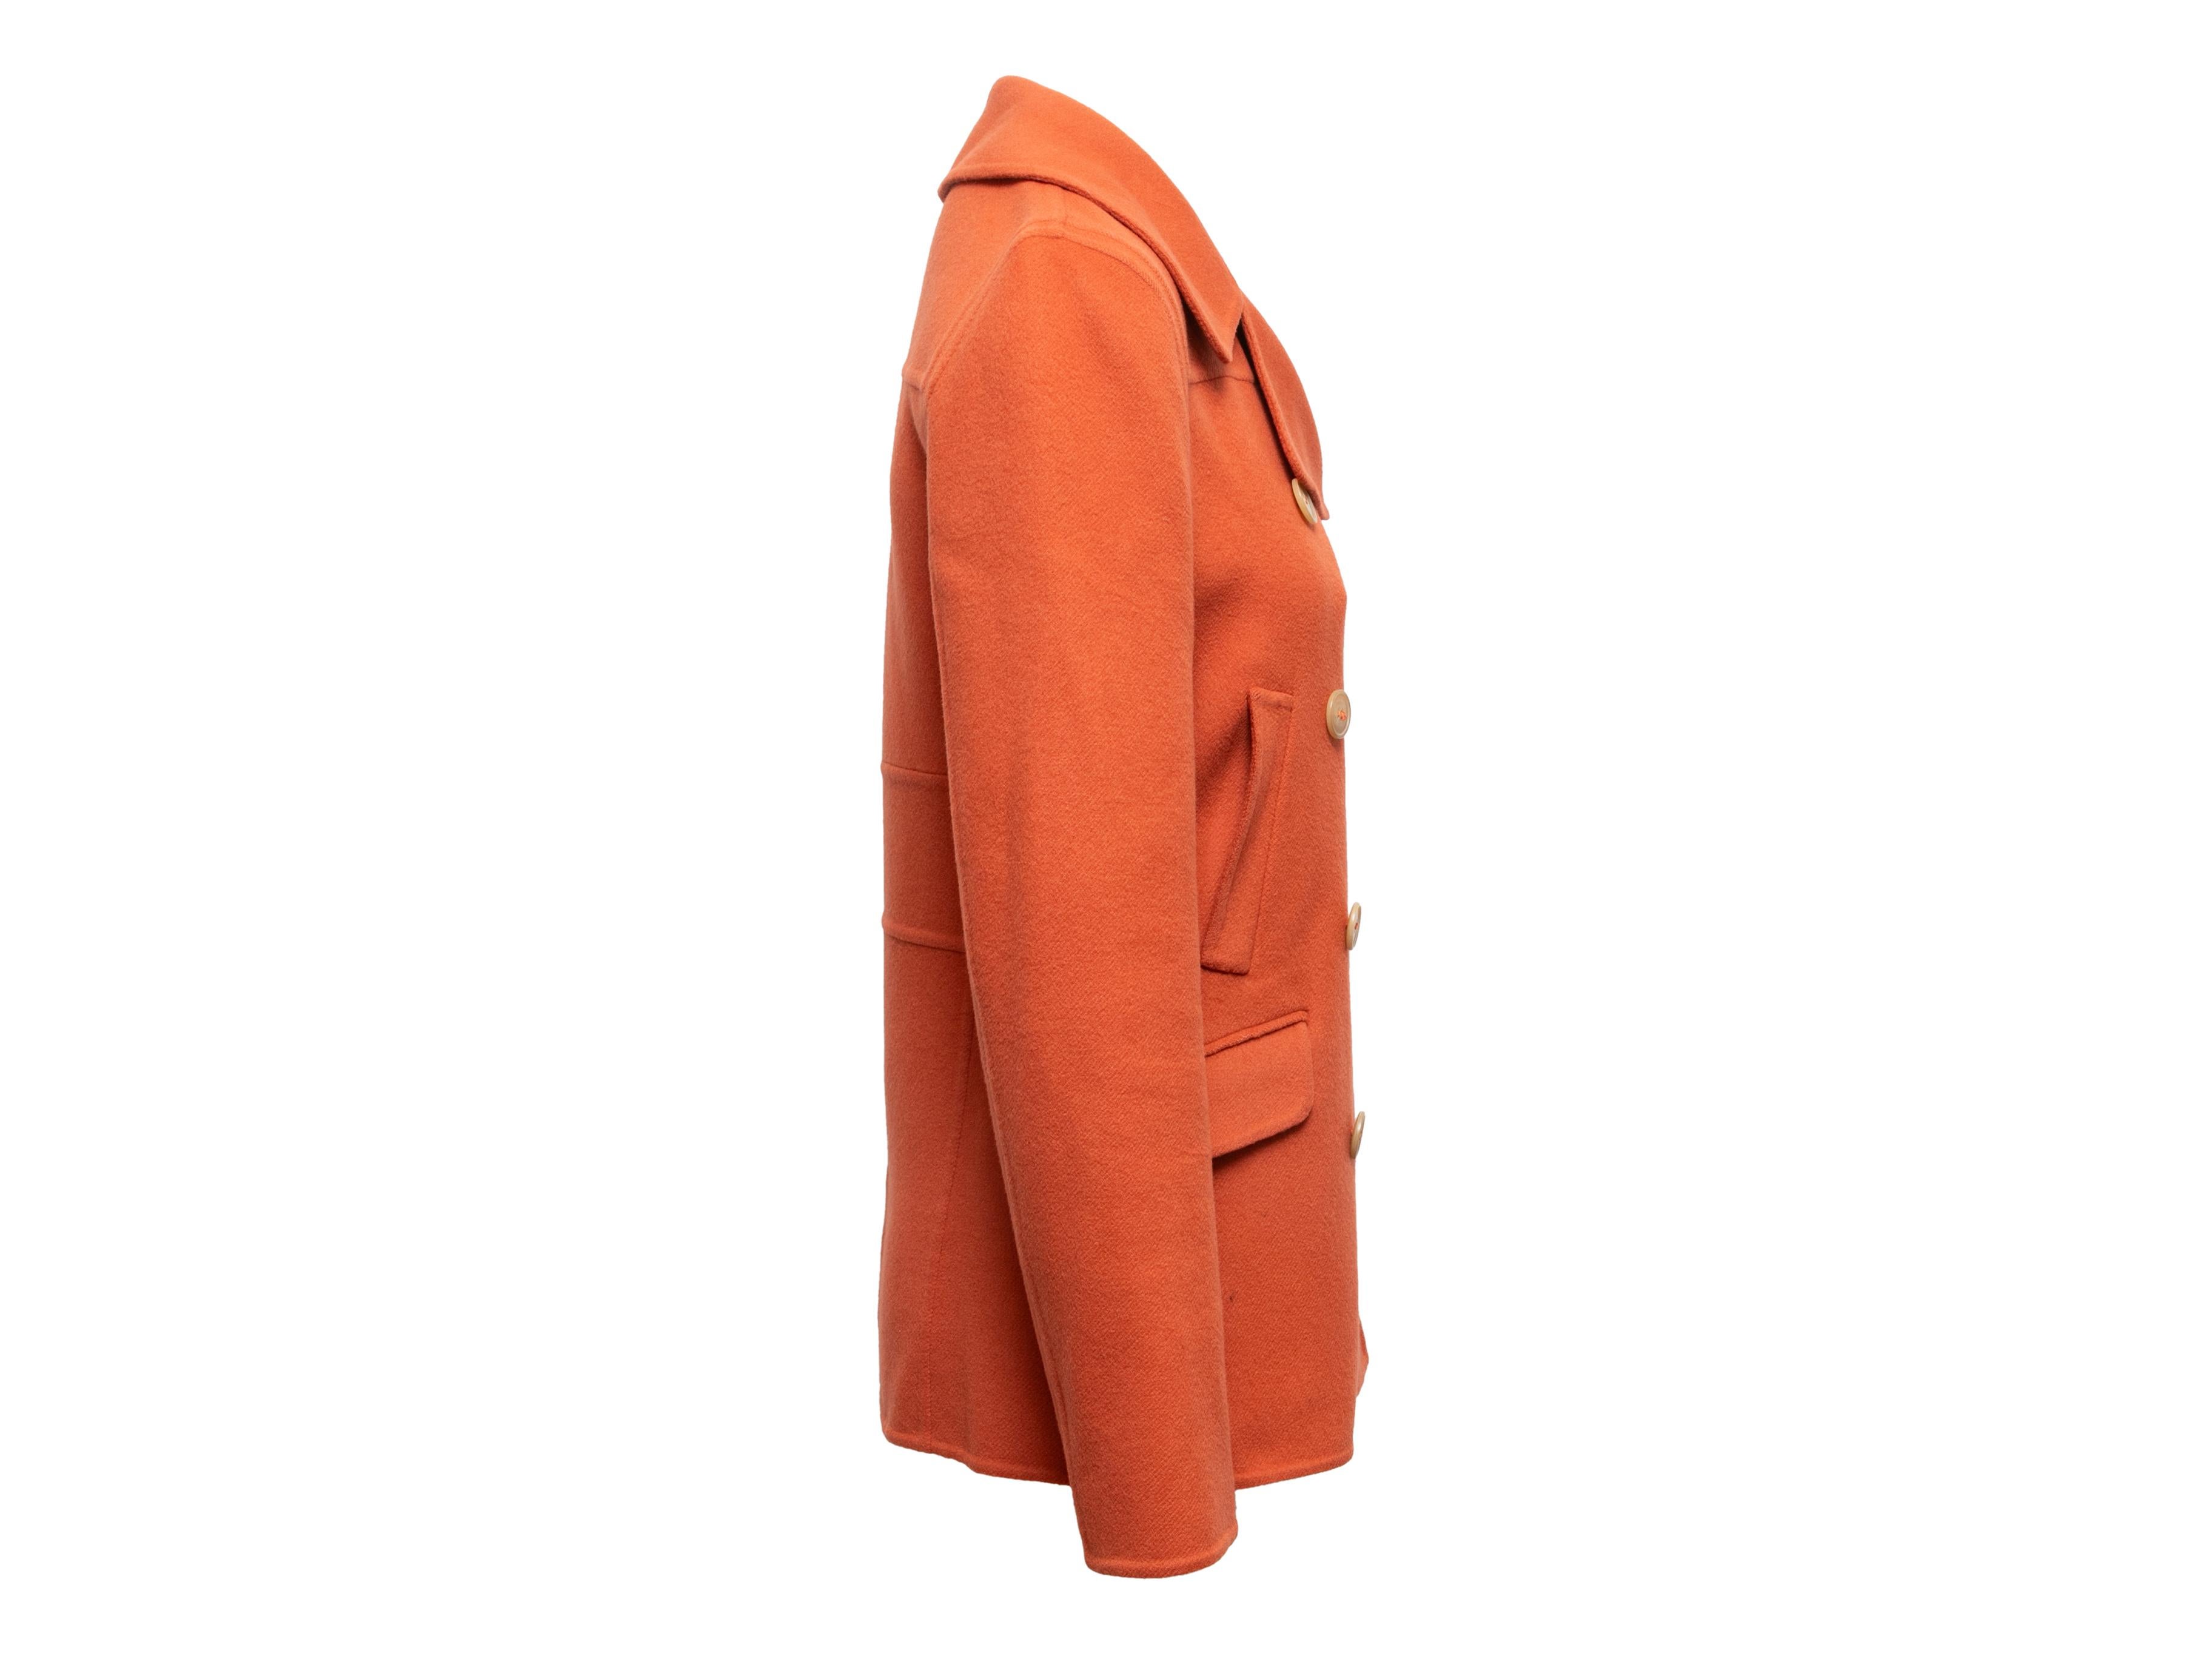 Orange cashmere double-breasted peacoat by Calvin Klein Collection. Notched lapel. Dual hip pockets. Button closures at front. 30